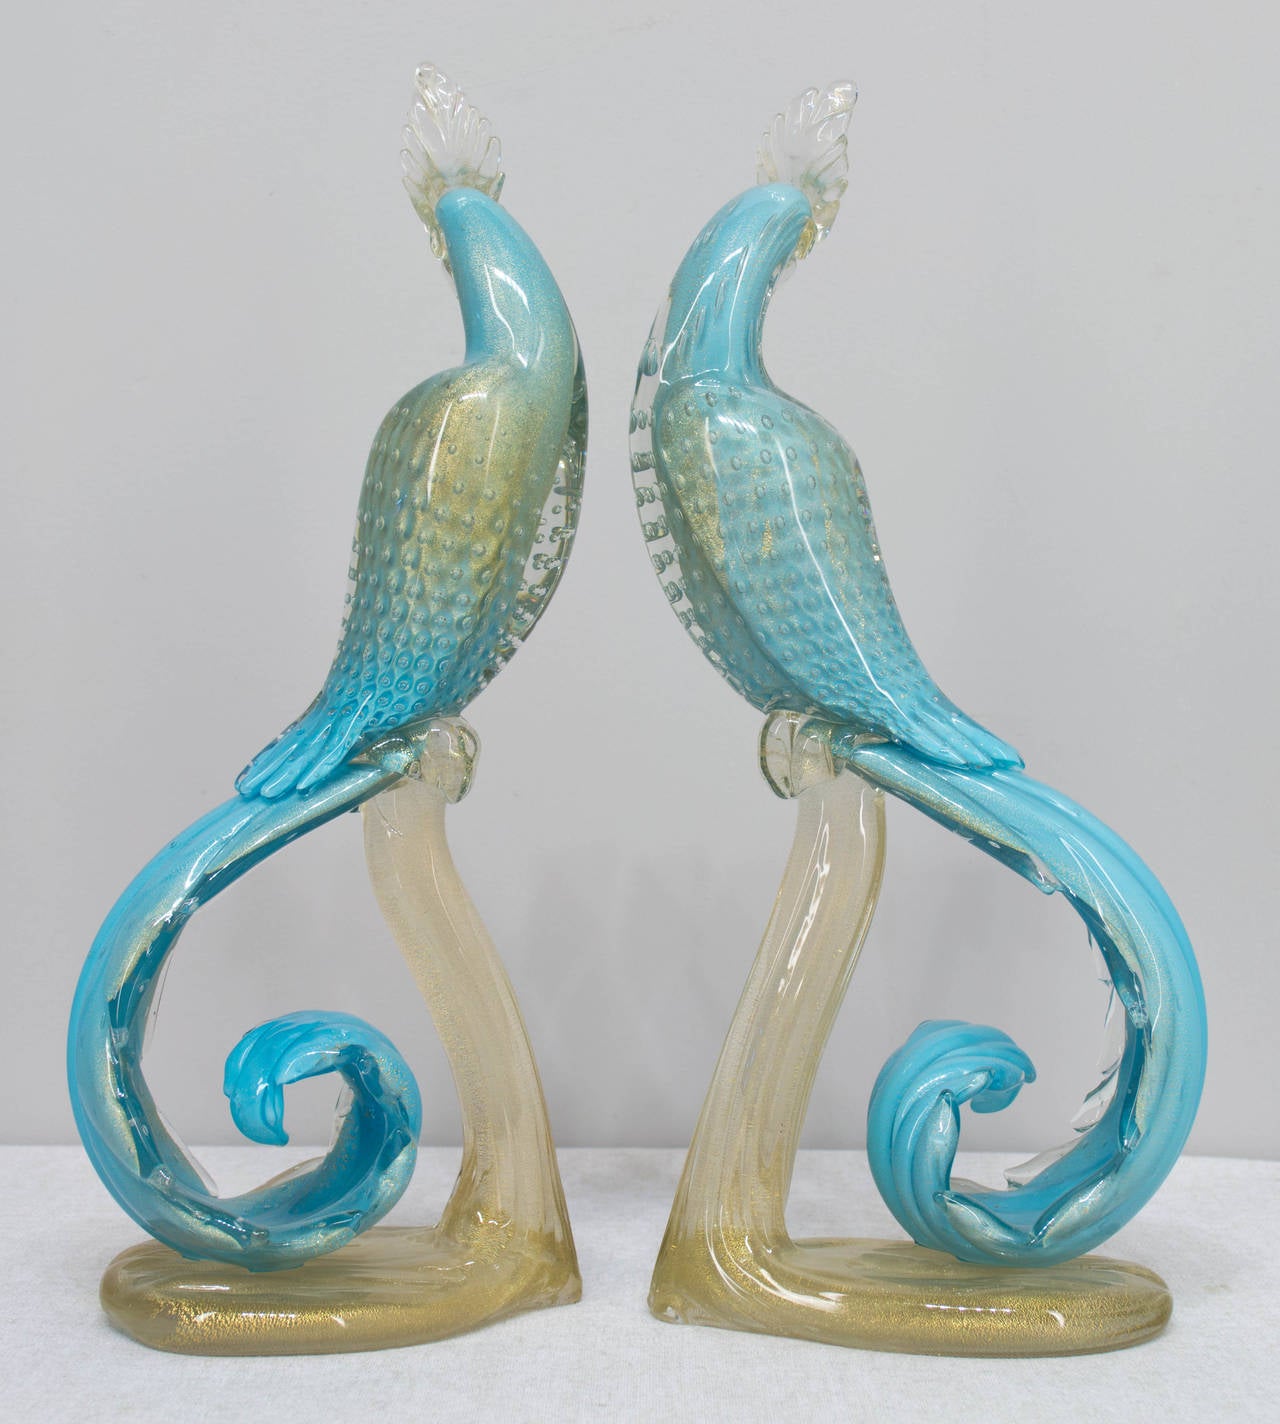 Rare pair of handblown Mid-Century Murano glass parrots by Alfredo Barbini, circa 1950. Beautiful light blue color with gold inclusions throughout and controlled bubbles on the body and wings. Tall, elegant curving form of the body and curl of the